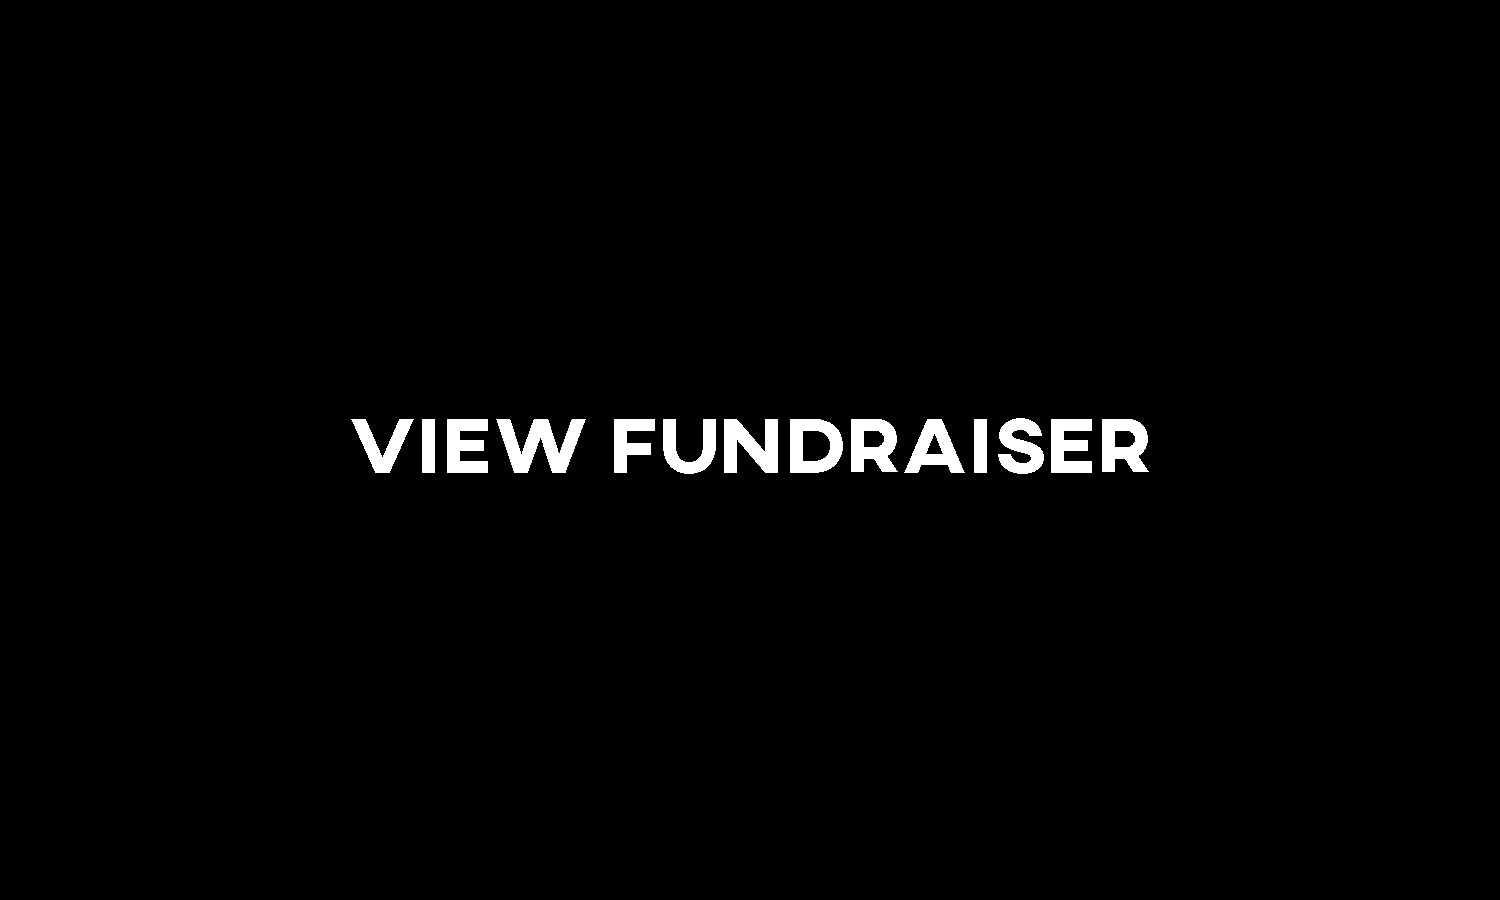 View Fundraiser